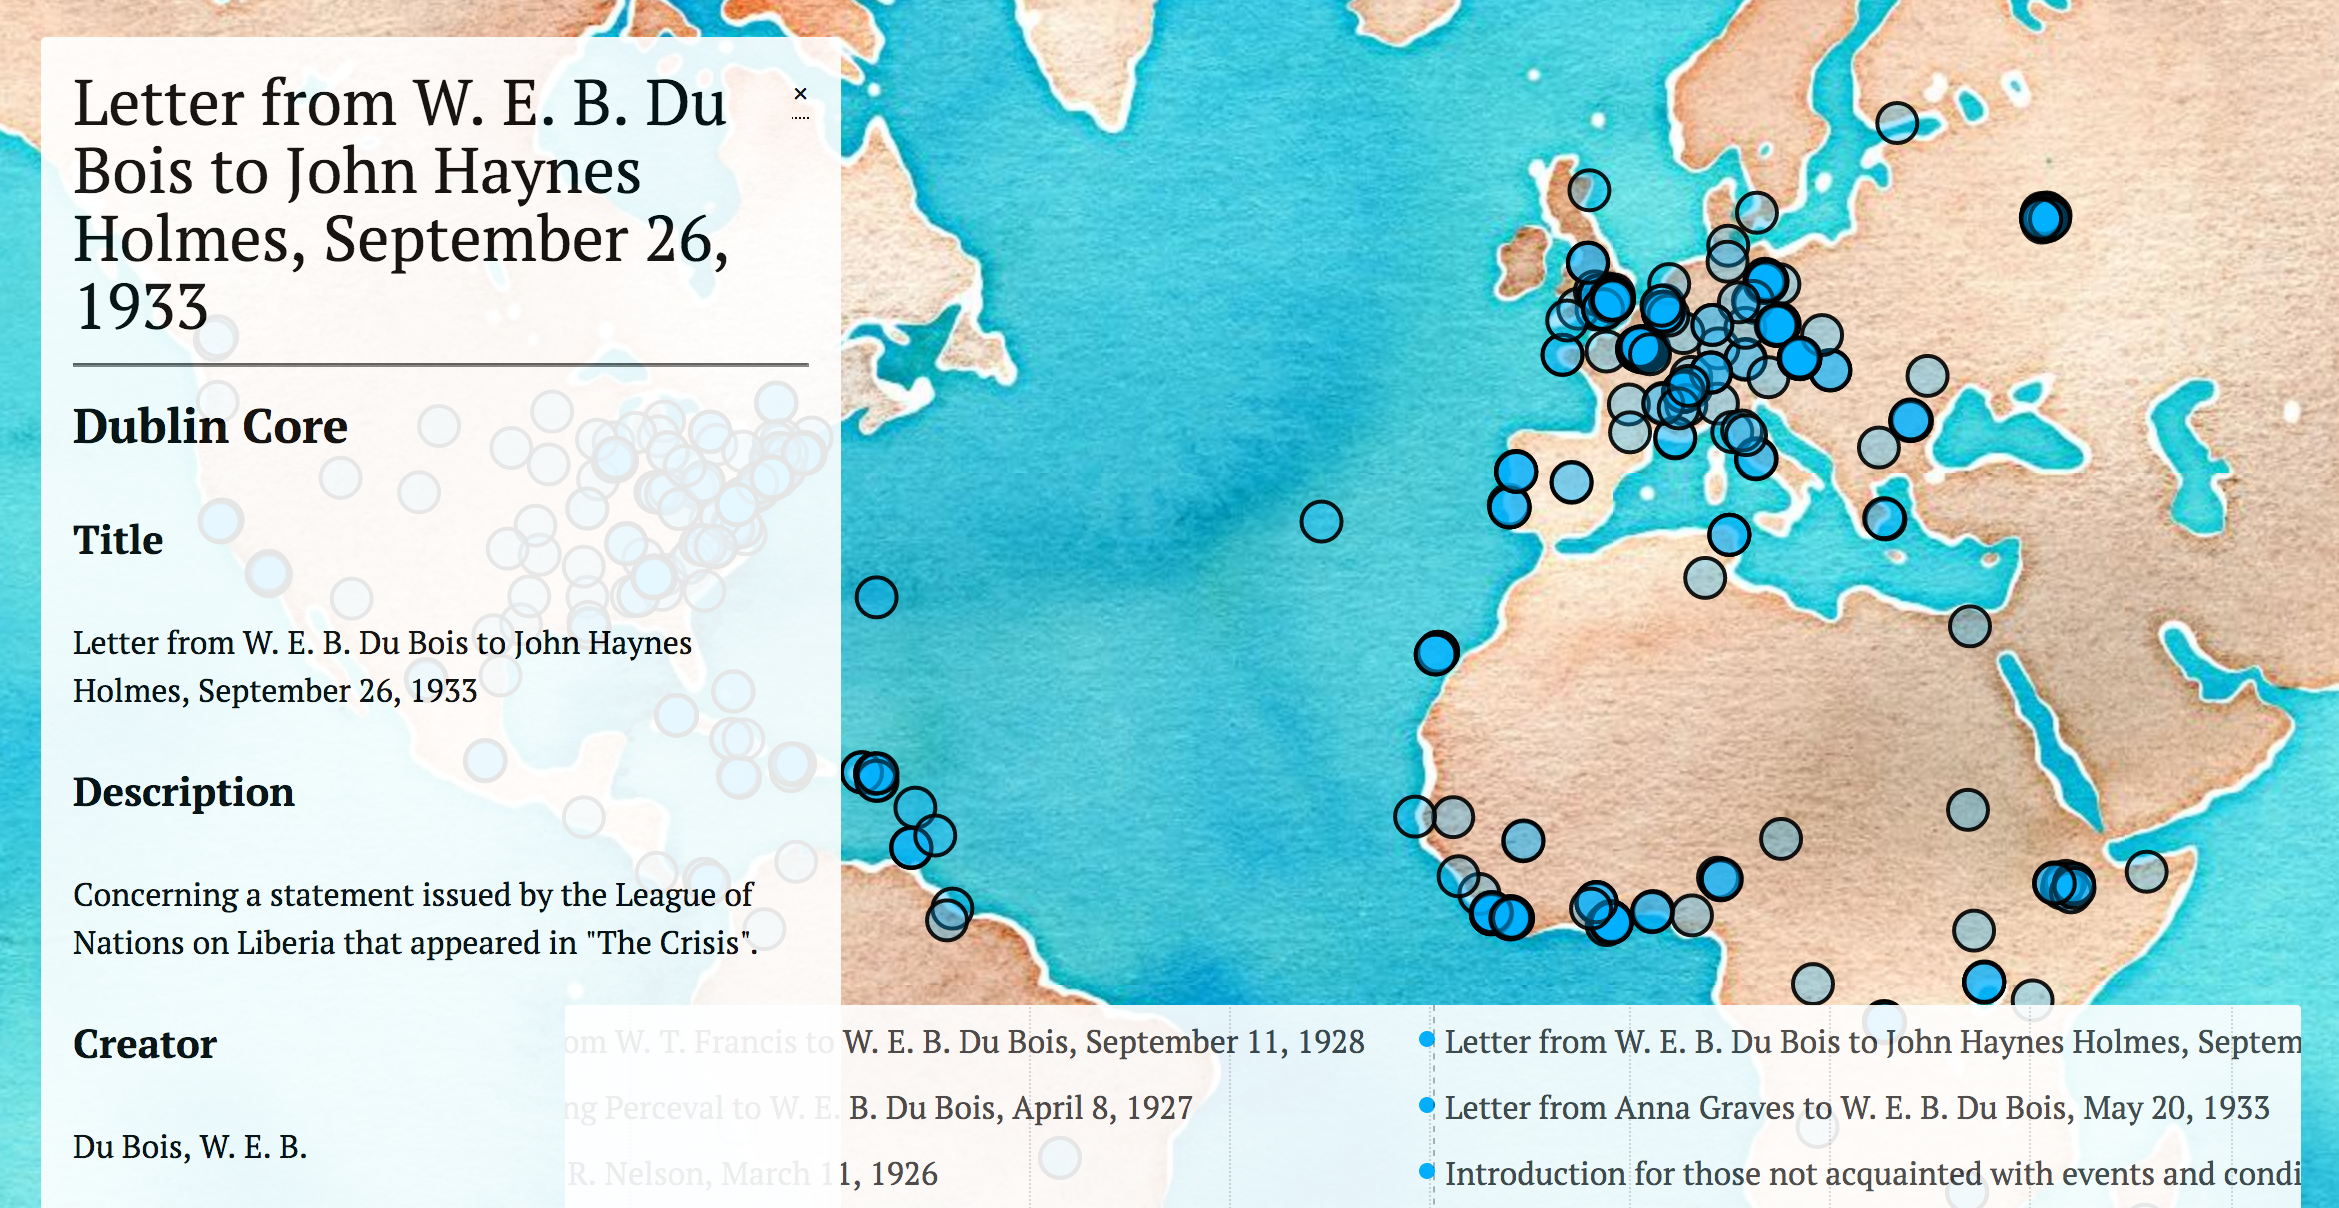 Screenshot from Visualizing the Global Du Bois that shows an an archival record for a letter from Du Bois to John Haynes Holmes on a statement issued by the League of Nations on Liberia 